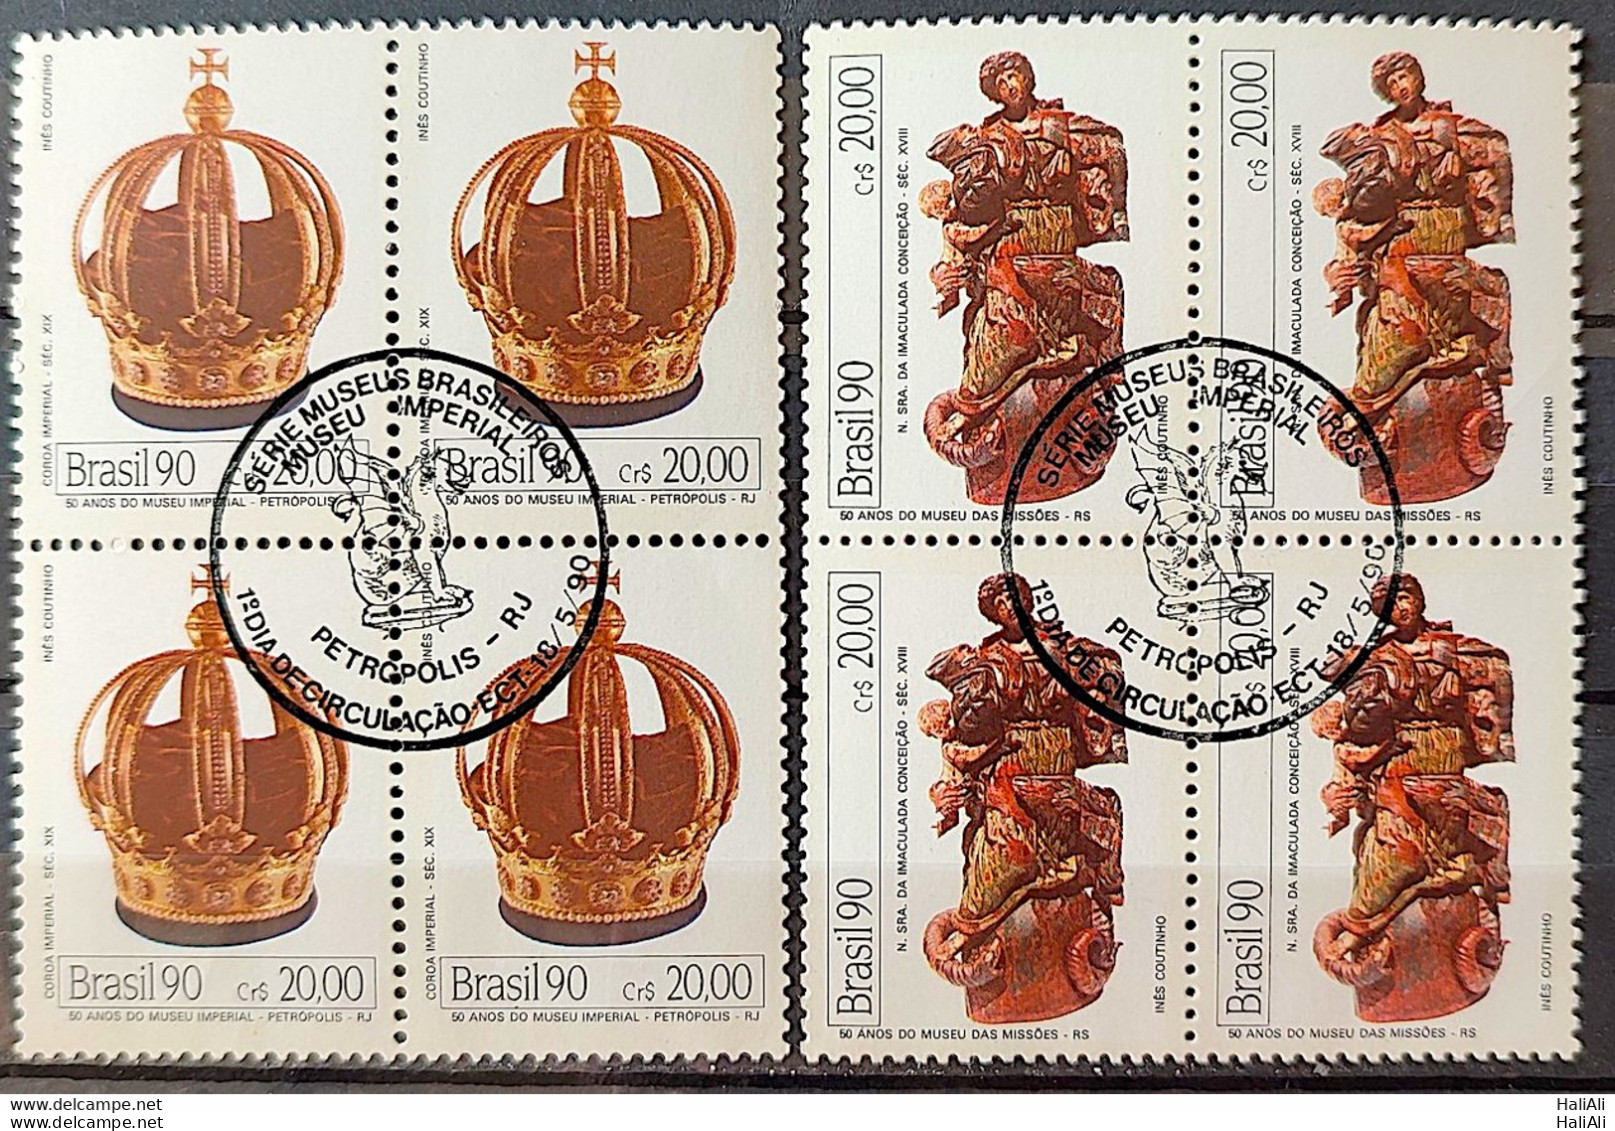 C 1683 Brazil Stamp 50 Year Imperial Museum Of Missions History 1990 Block Of 4 CBC RJ Complete Series - Nuevos